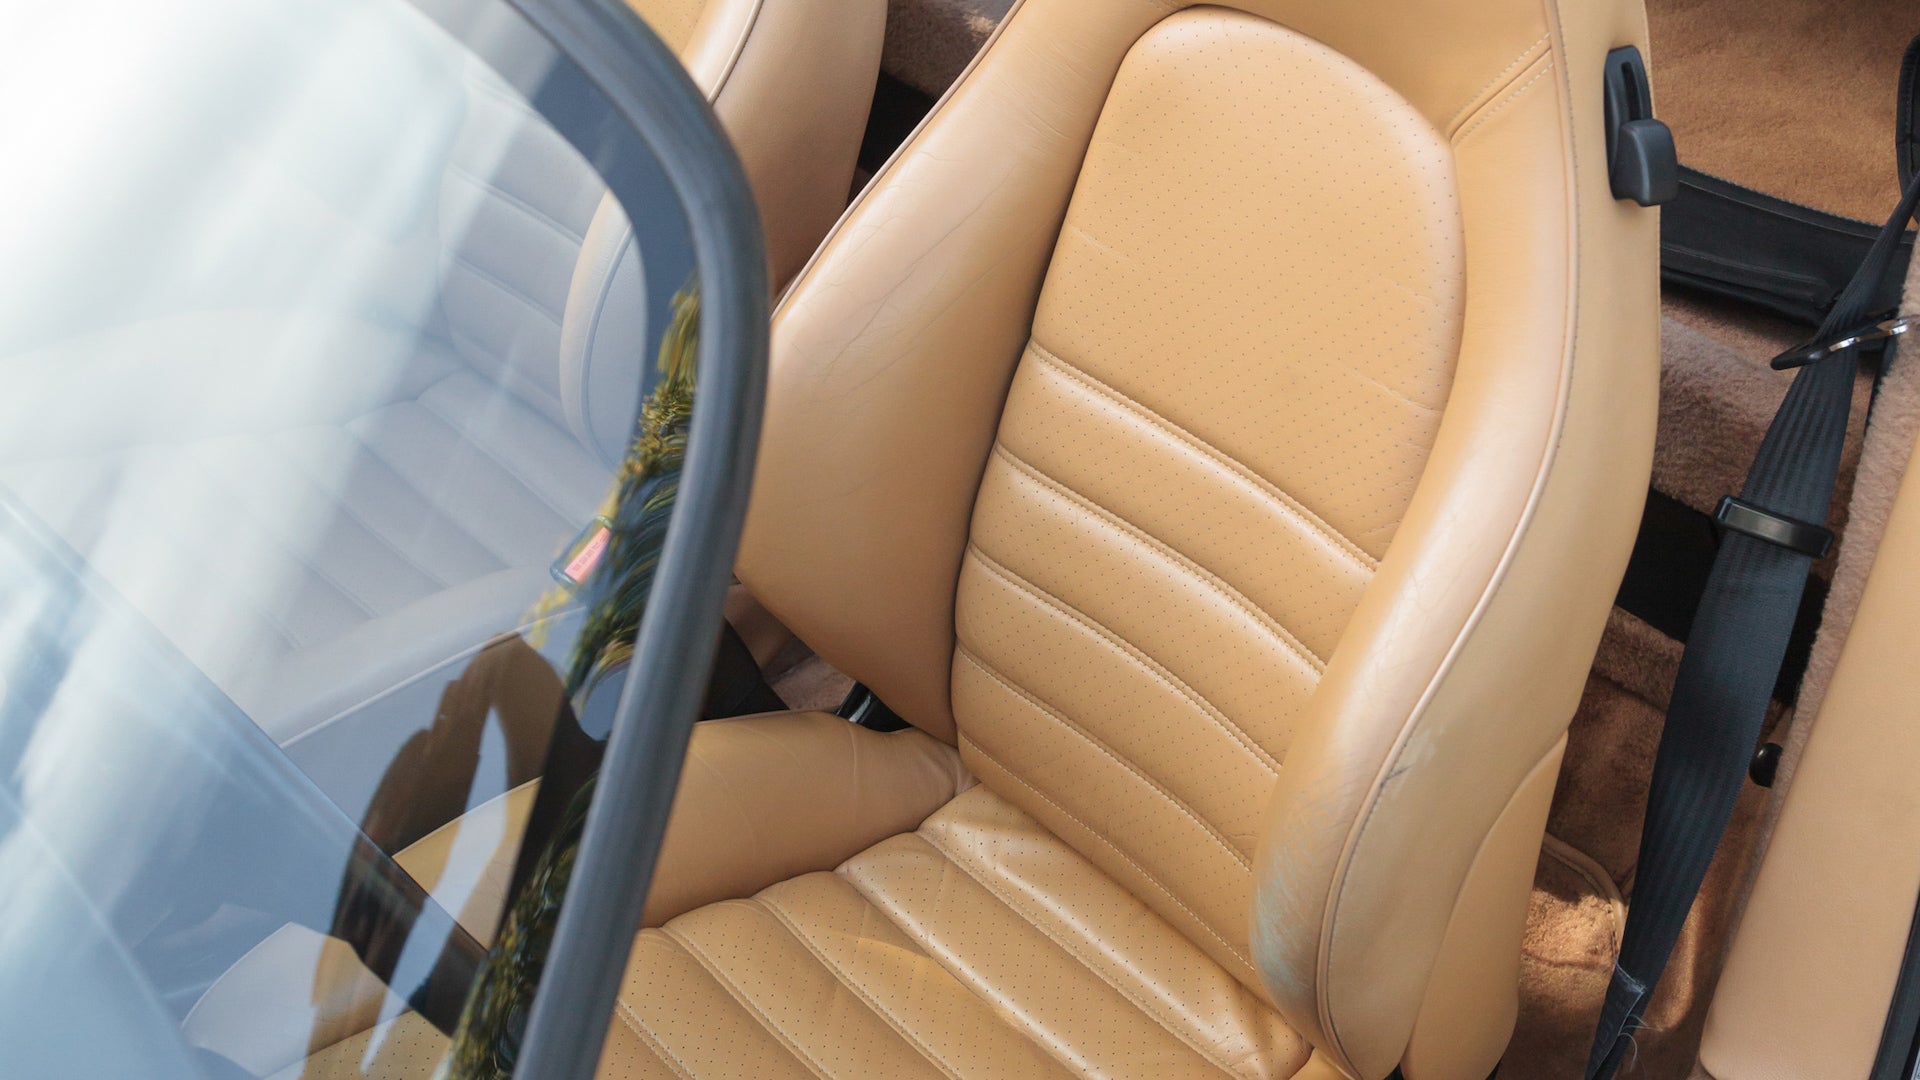 Leatherette Vs Leather What Are The, What Is Leatherette Upholstery